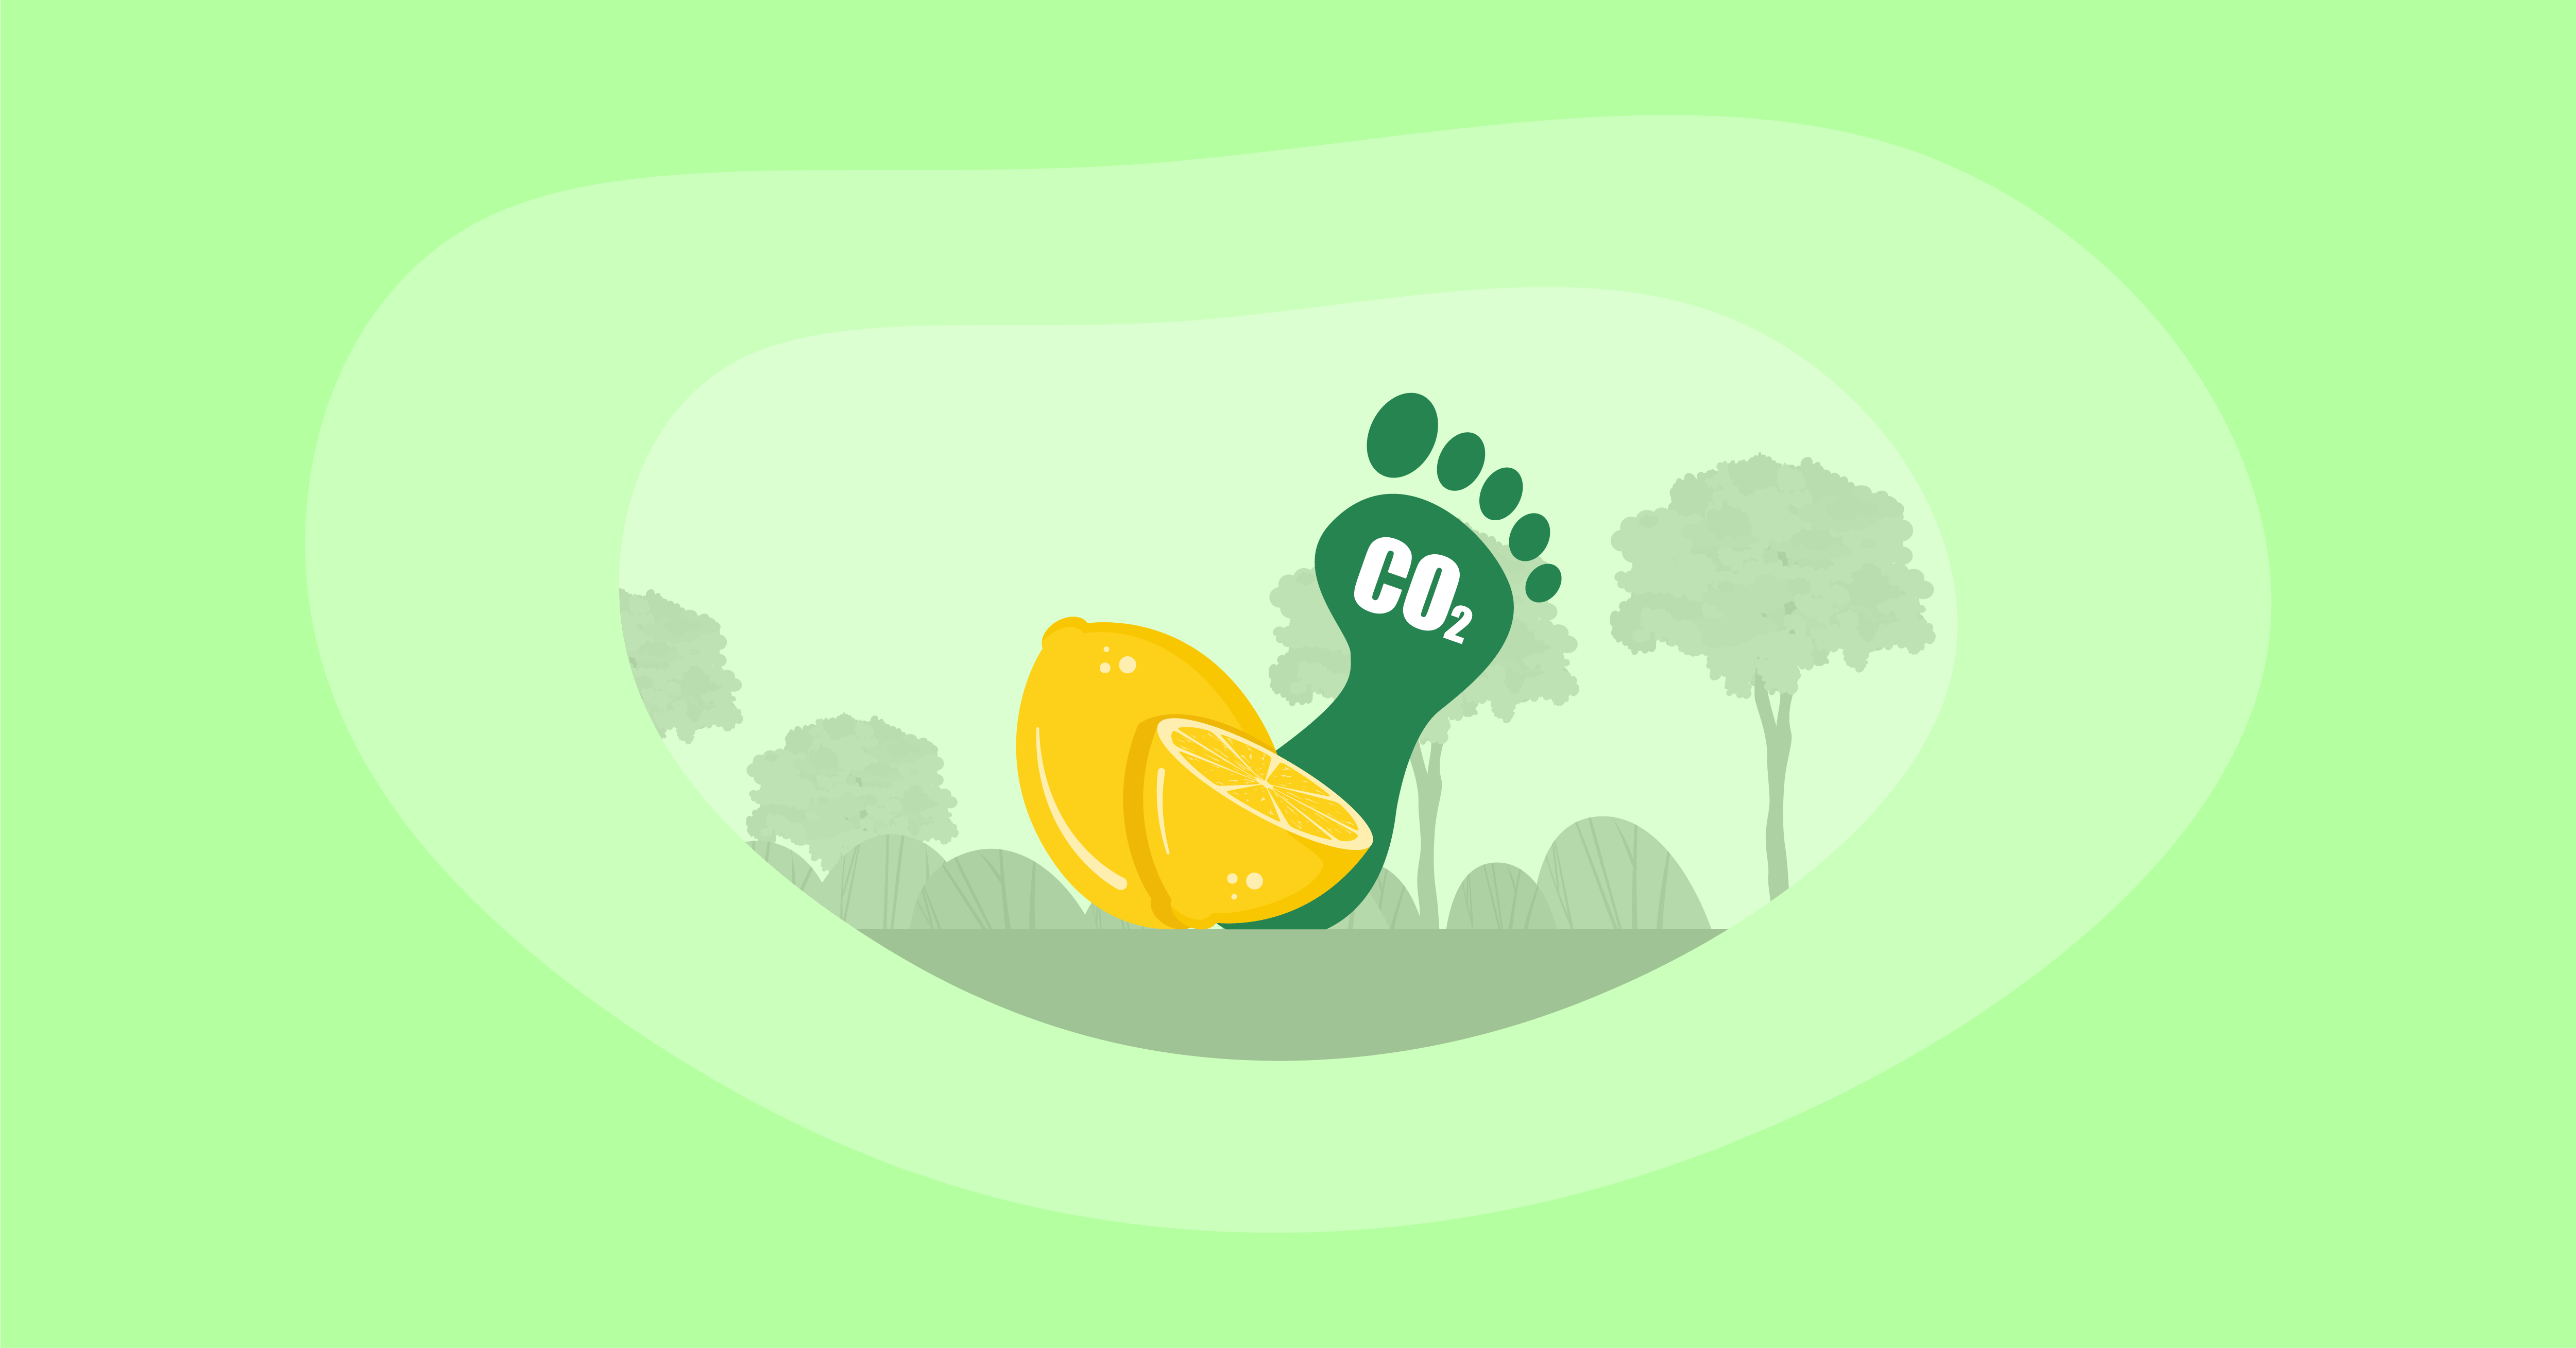 Attempted illustration of lemons with their carbon footprint